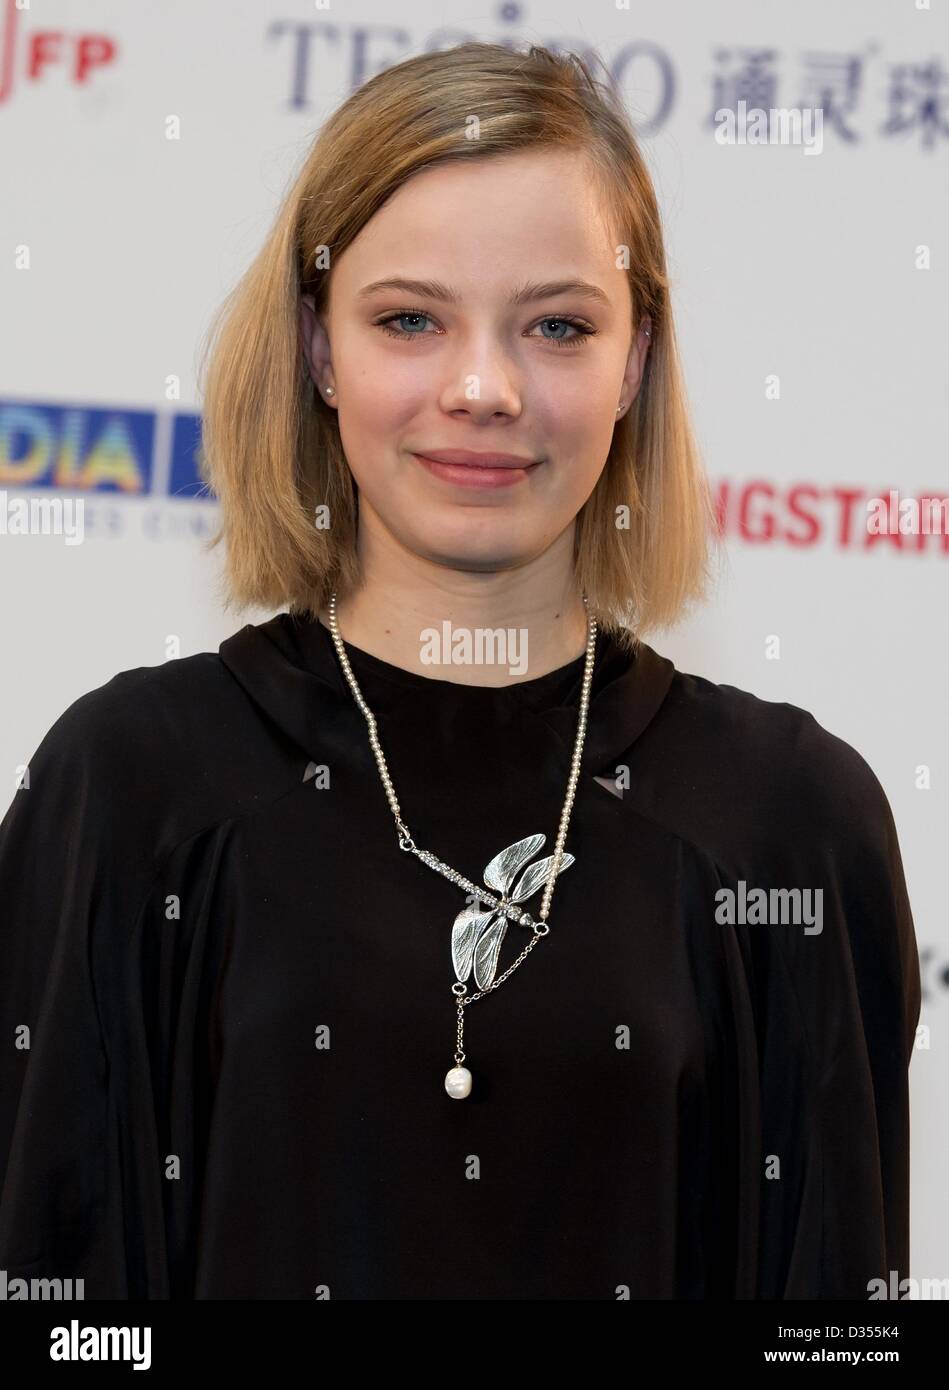 German Actress Saskia Rosendahl Attends A Photocall Of The Shooting Star 2013 Presented By The